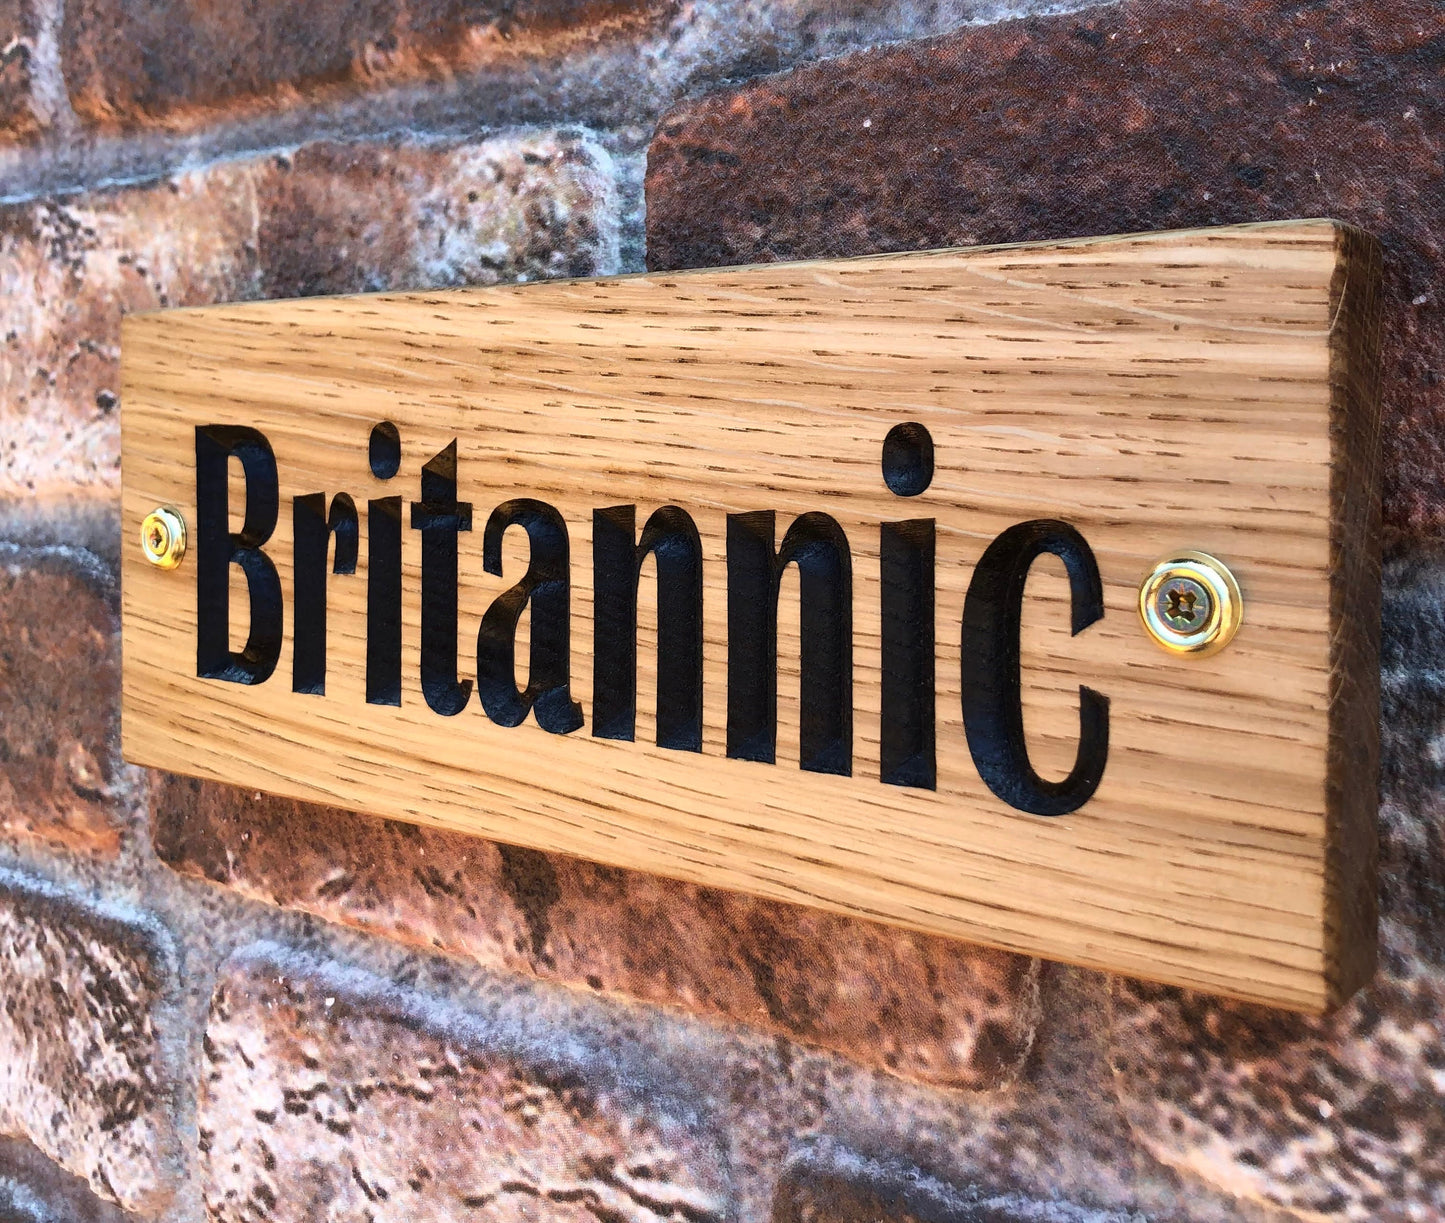 Personalised Horse Stable/Stall Name Sign - Britannic Bold OAK